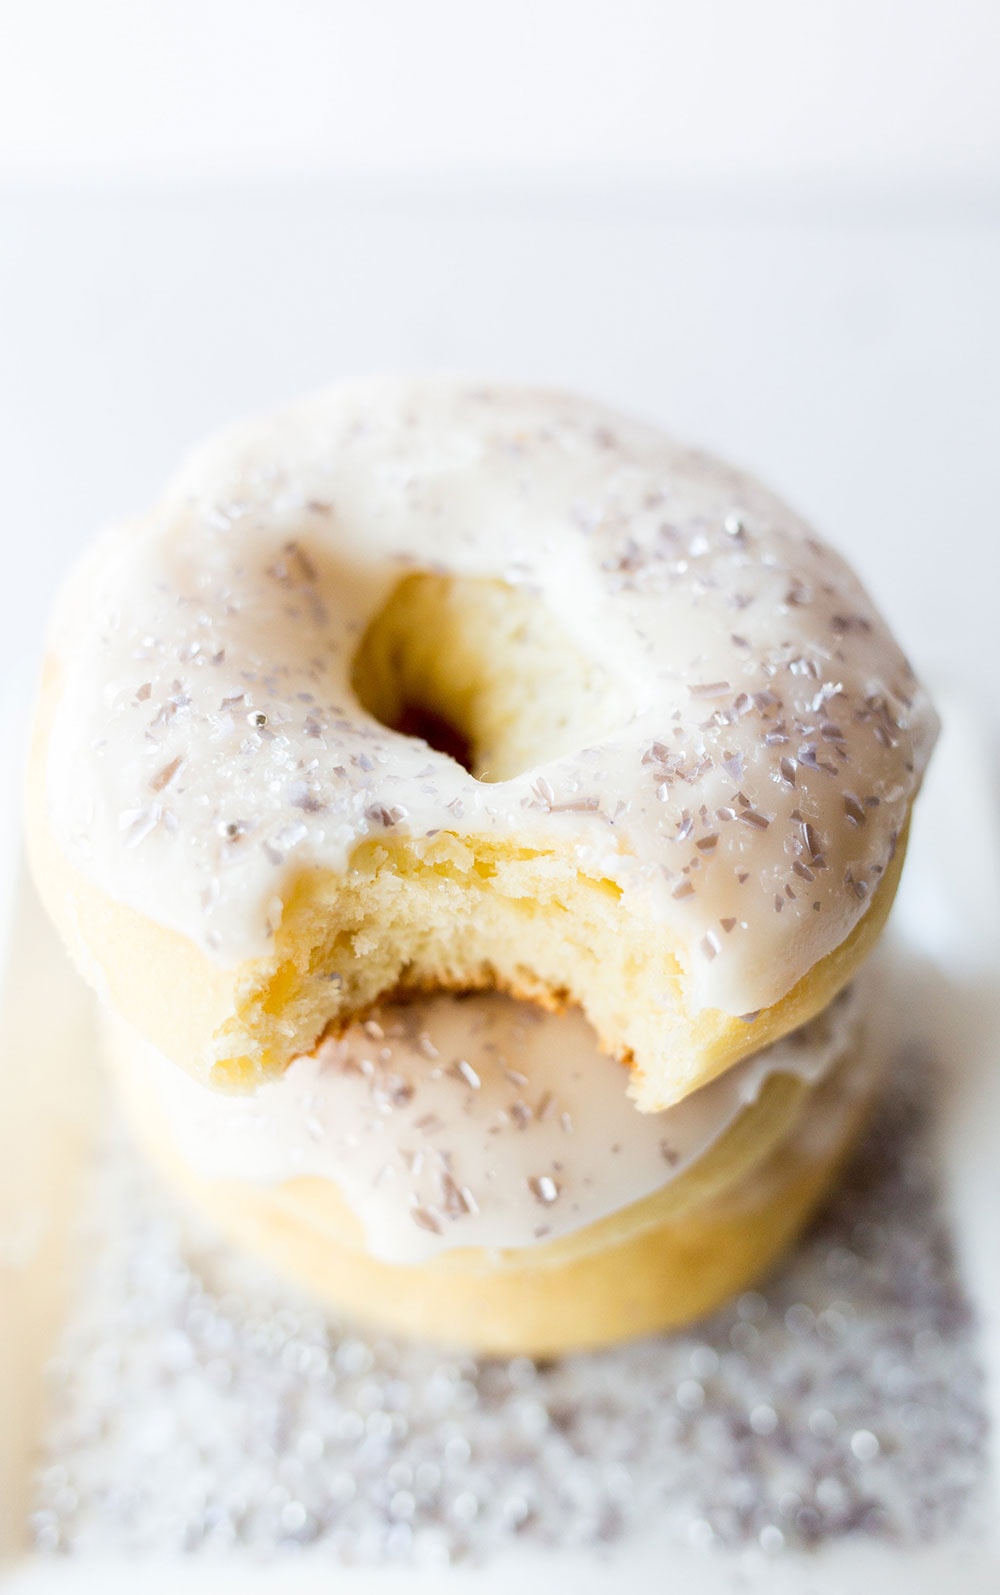 Baked, not fried, these yeast raised Champagne Doughnuts are perfect for any New Years party or even any bridal celebration!